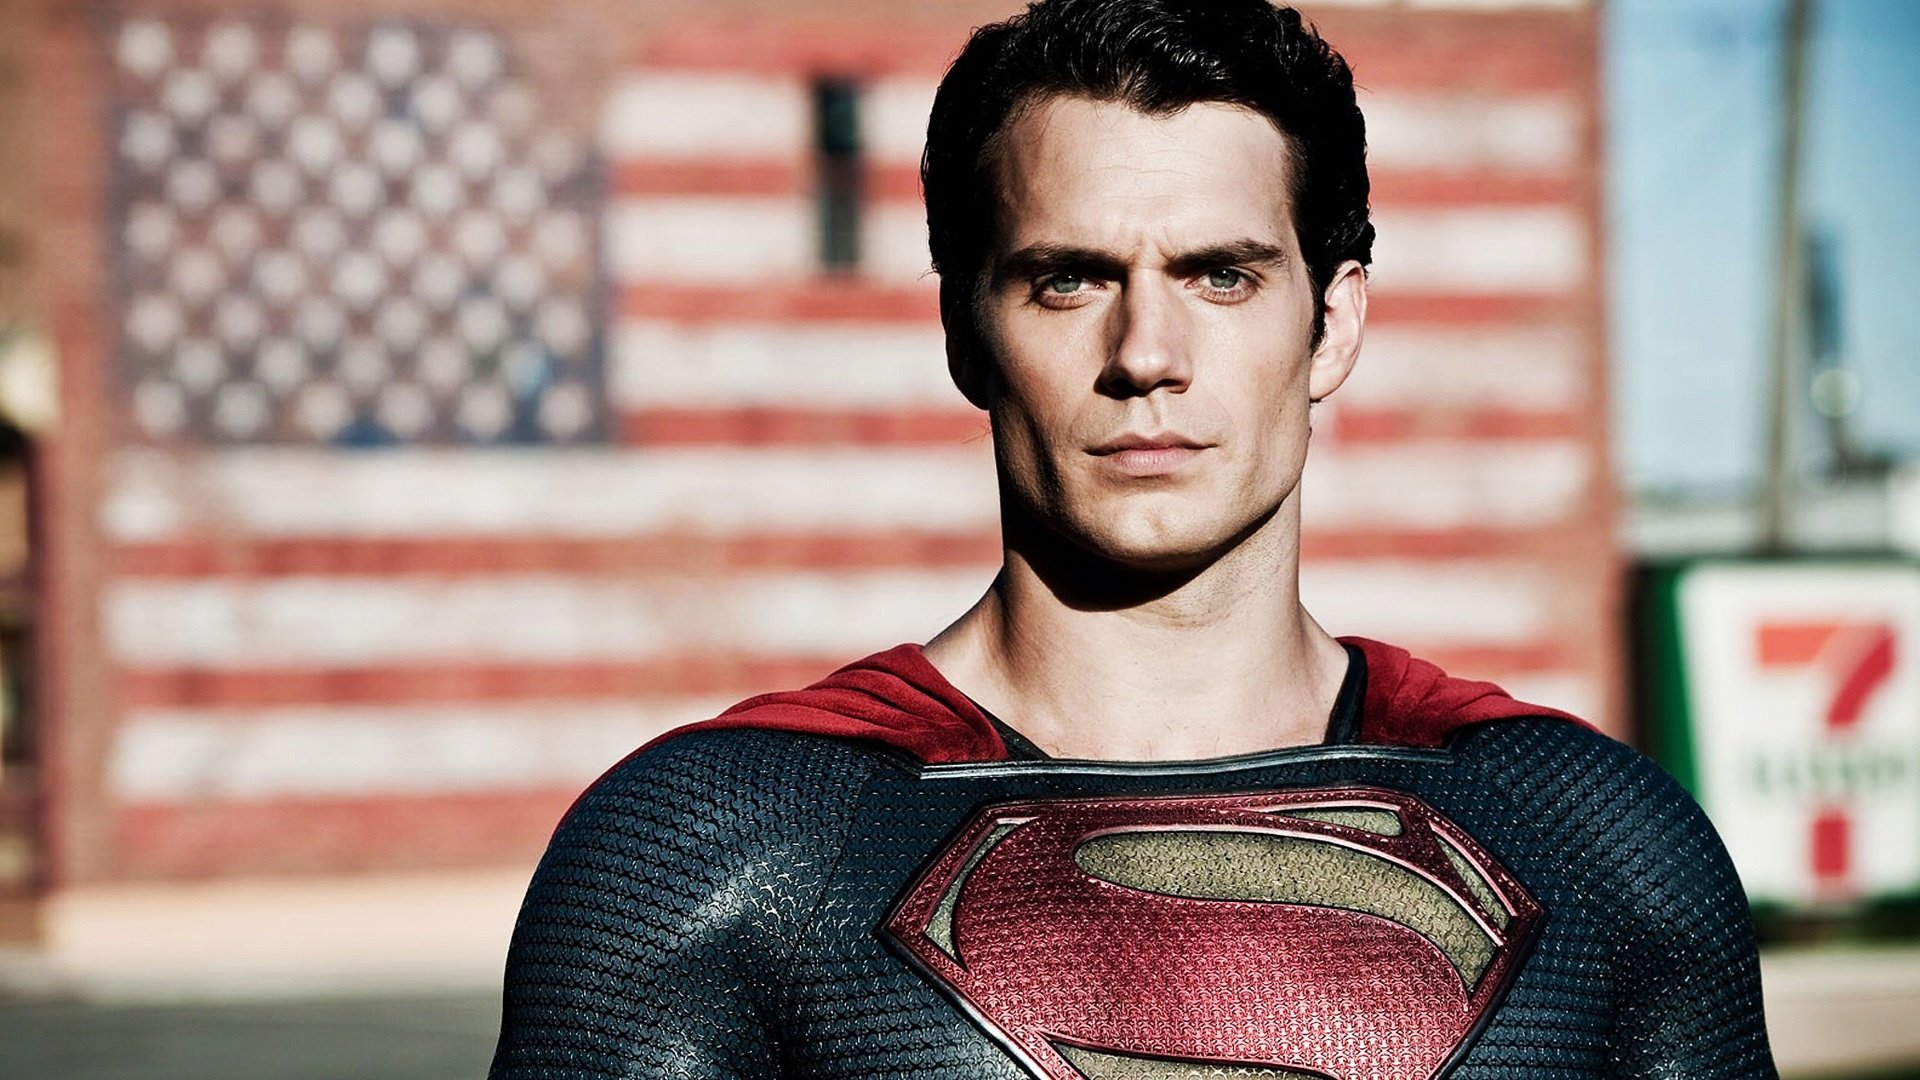 Best Man Of Steel wallpaper ID:127458 for High Resolution 1080p computer